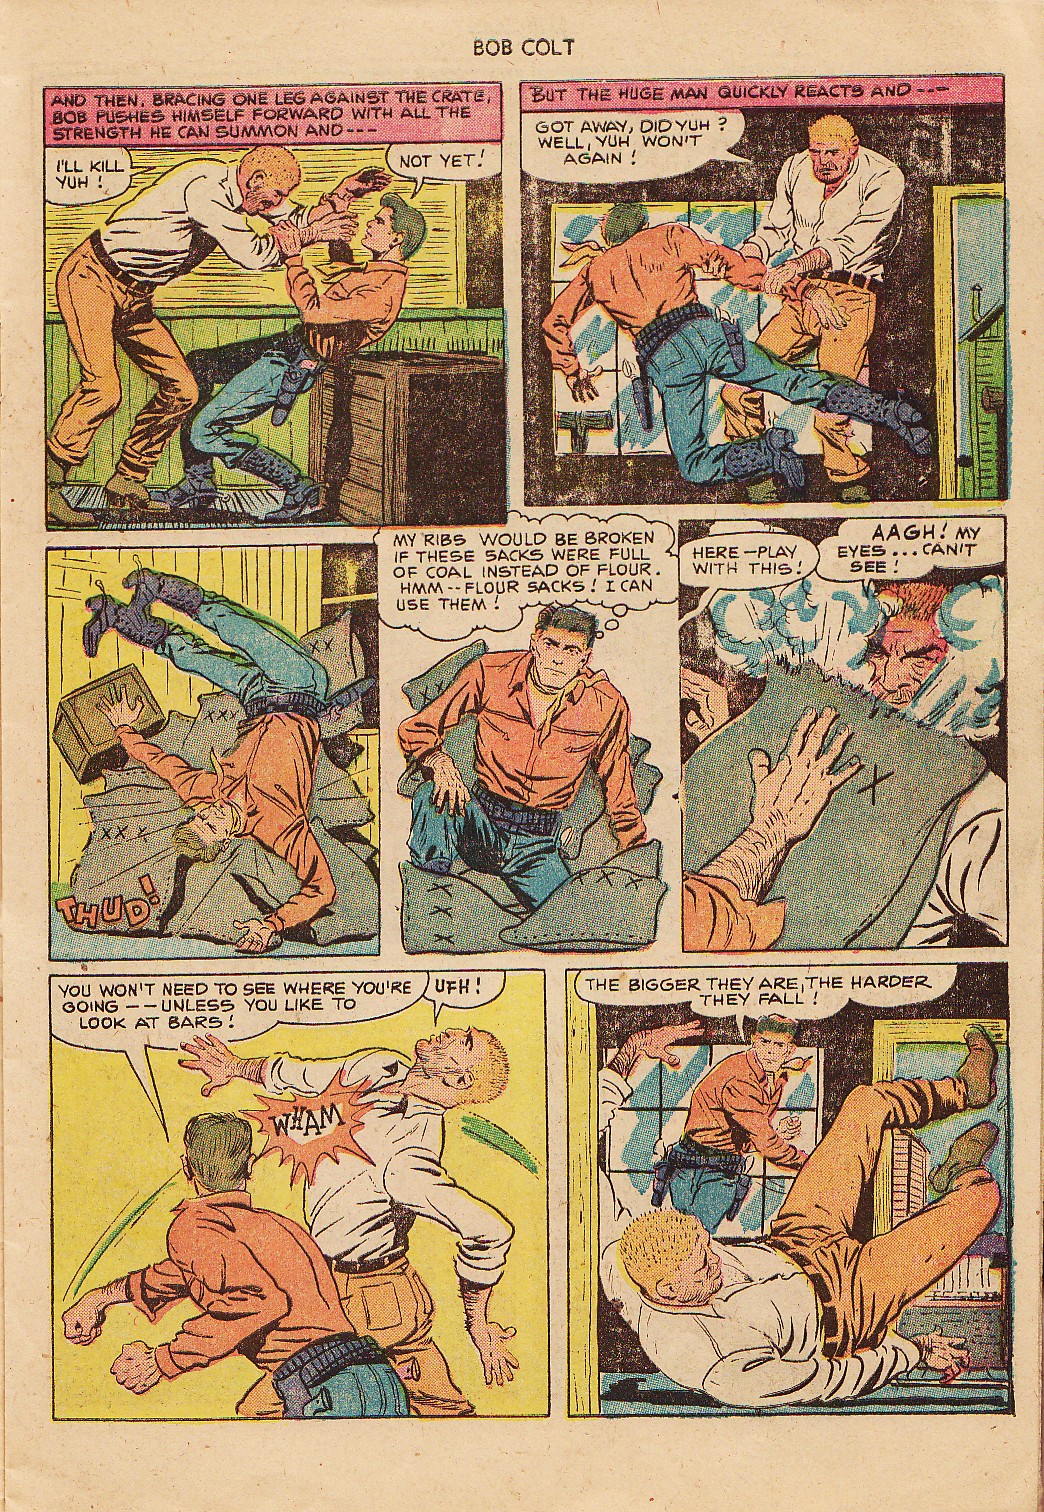 Read online Bob Colt Western comic -  Issue #7 - 13